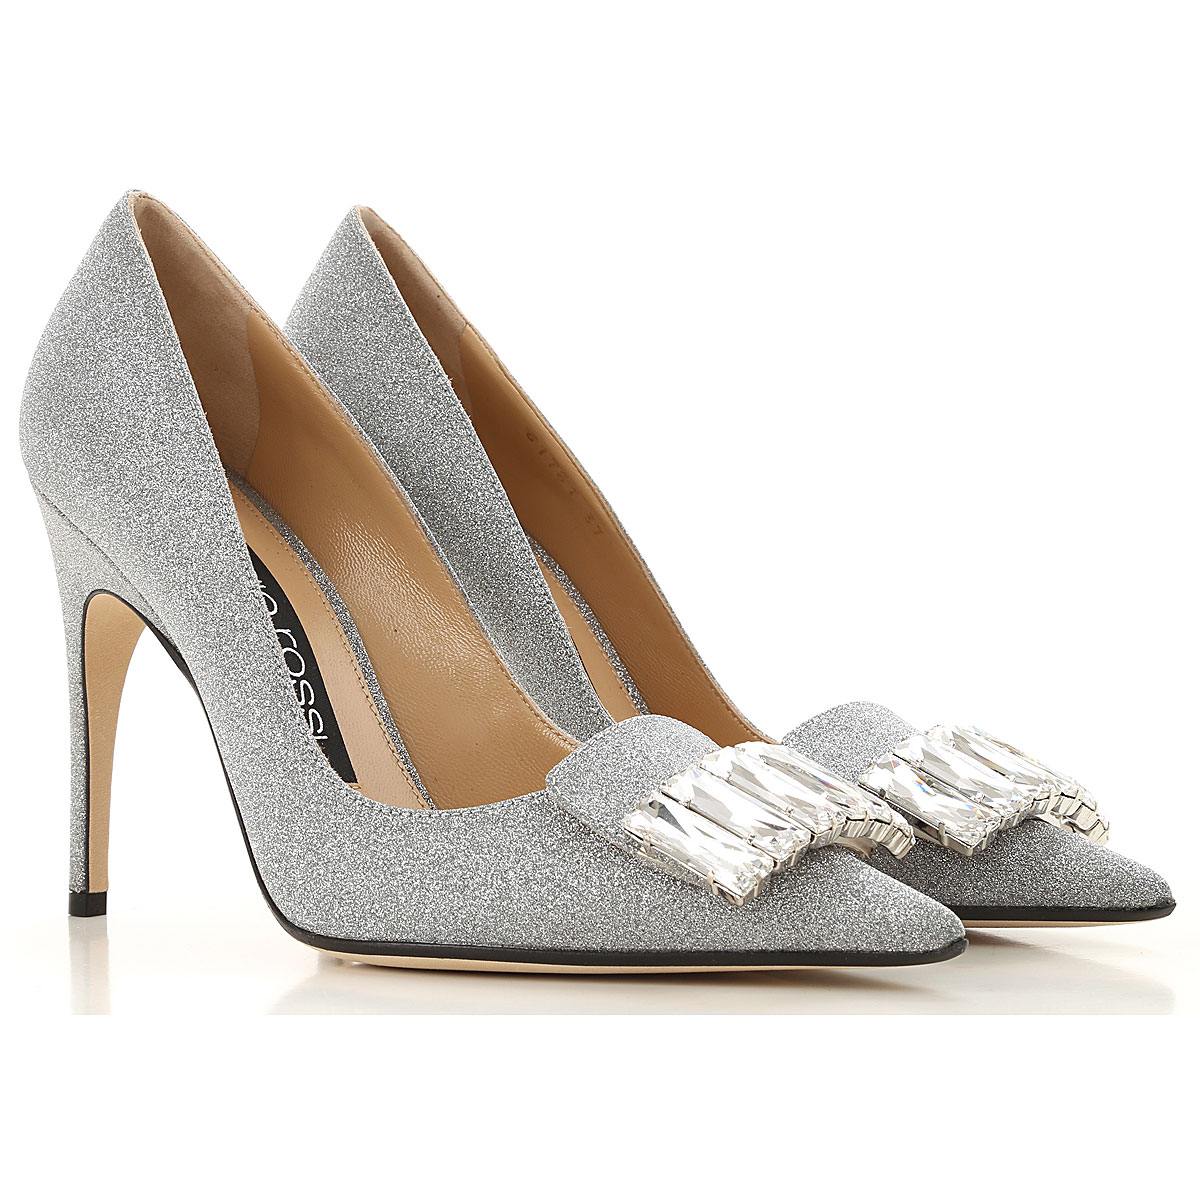 Womens Shoes Sergio Rossi, Style code: a81781-mfn424-8198